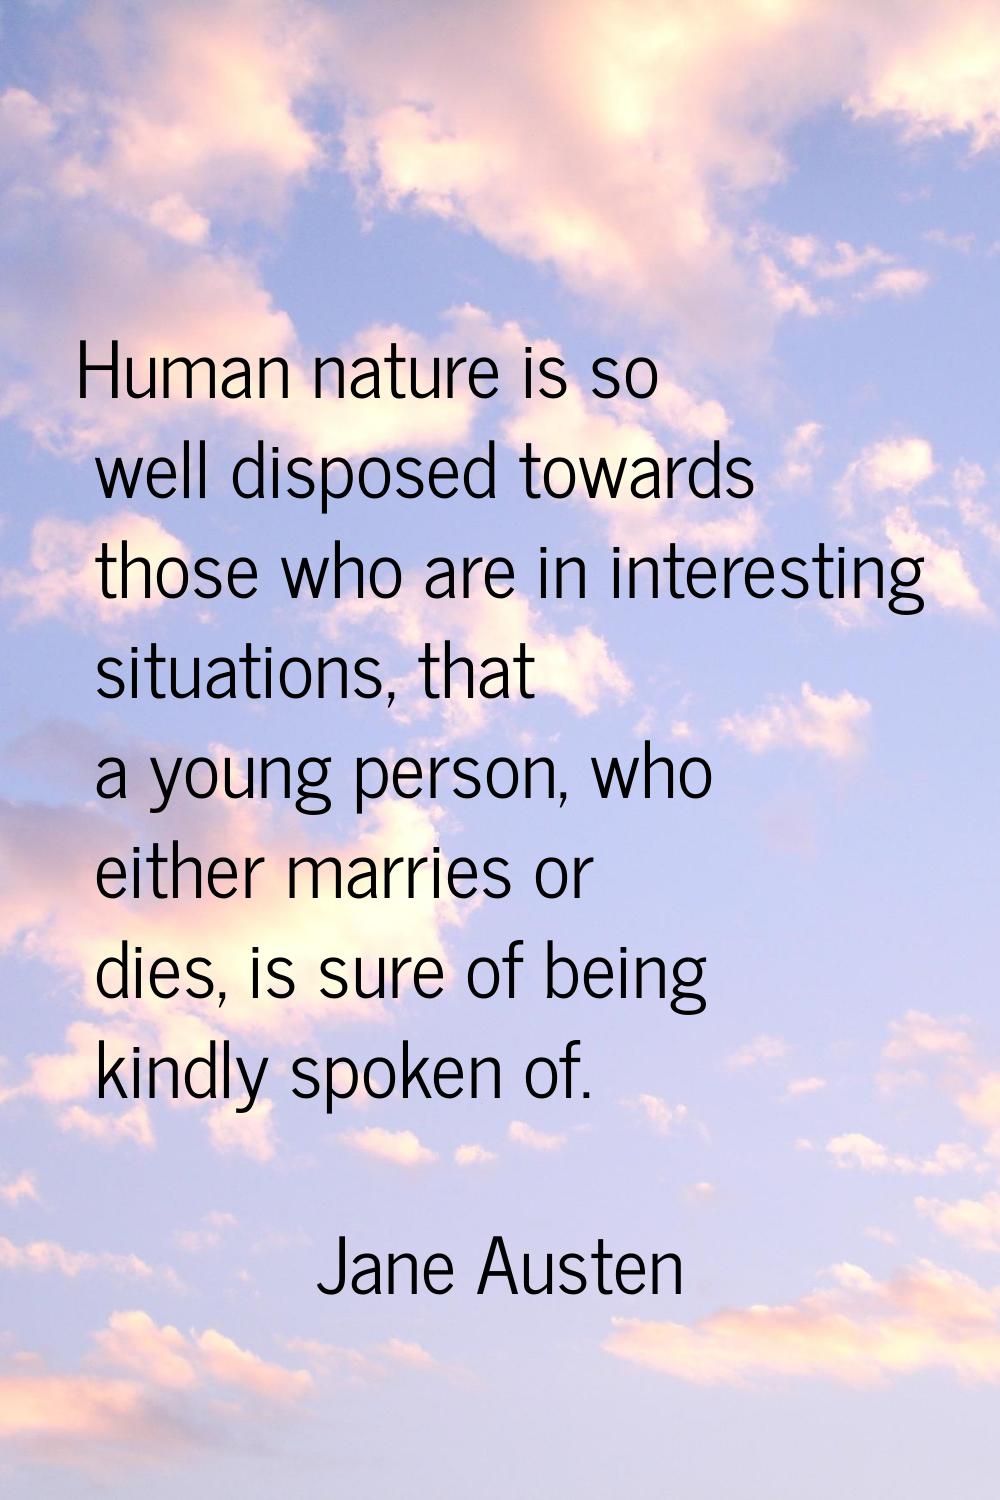 Human nature is so well disposed towards those who are in interesting situations, that a young pers